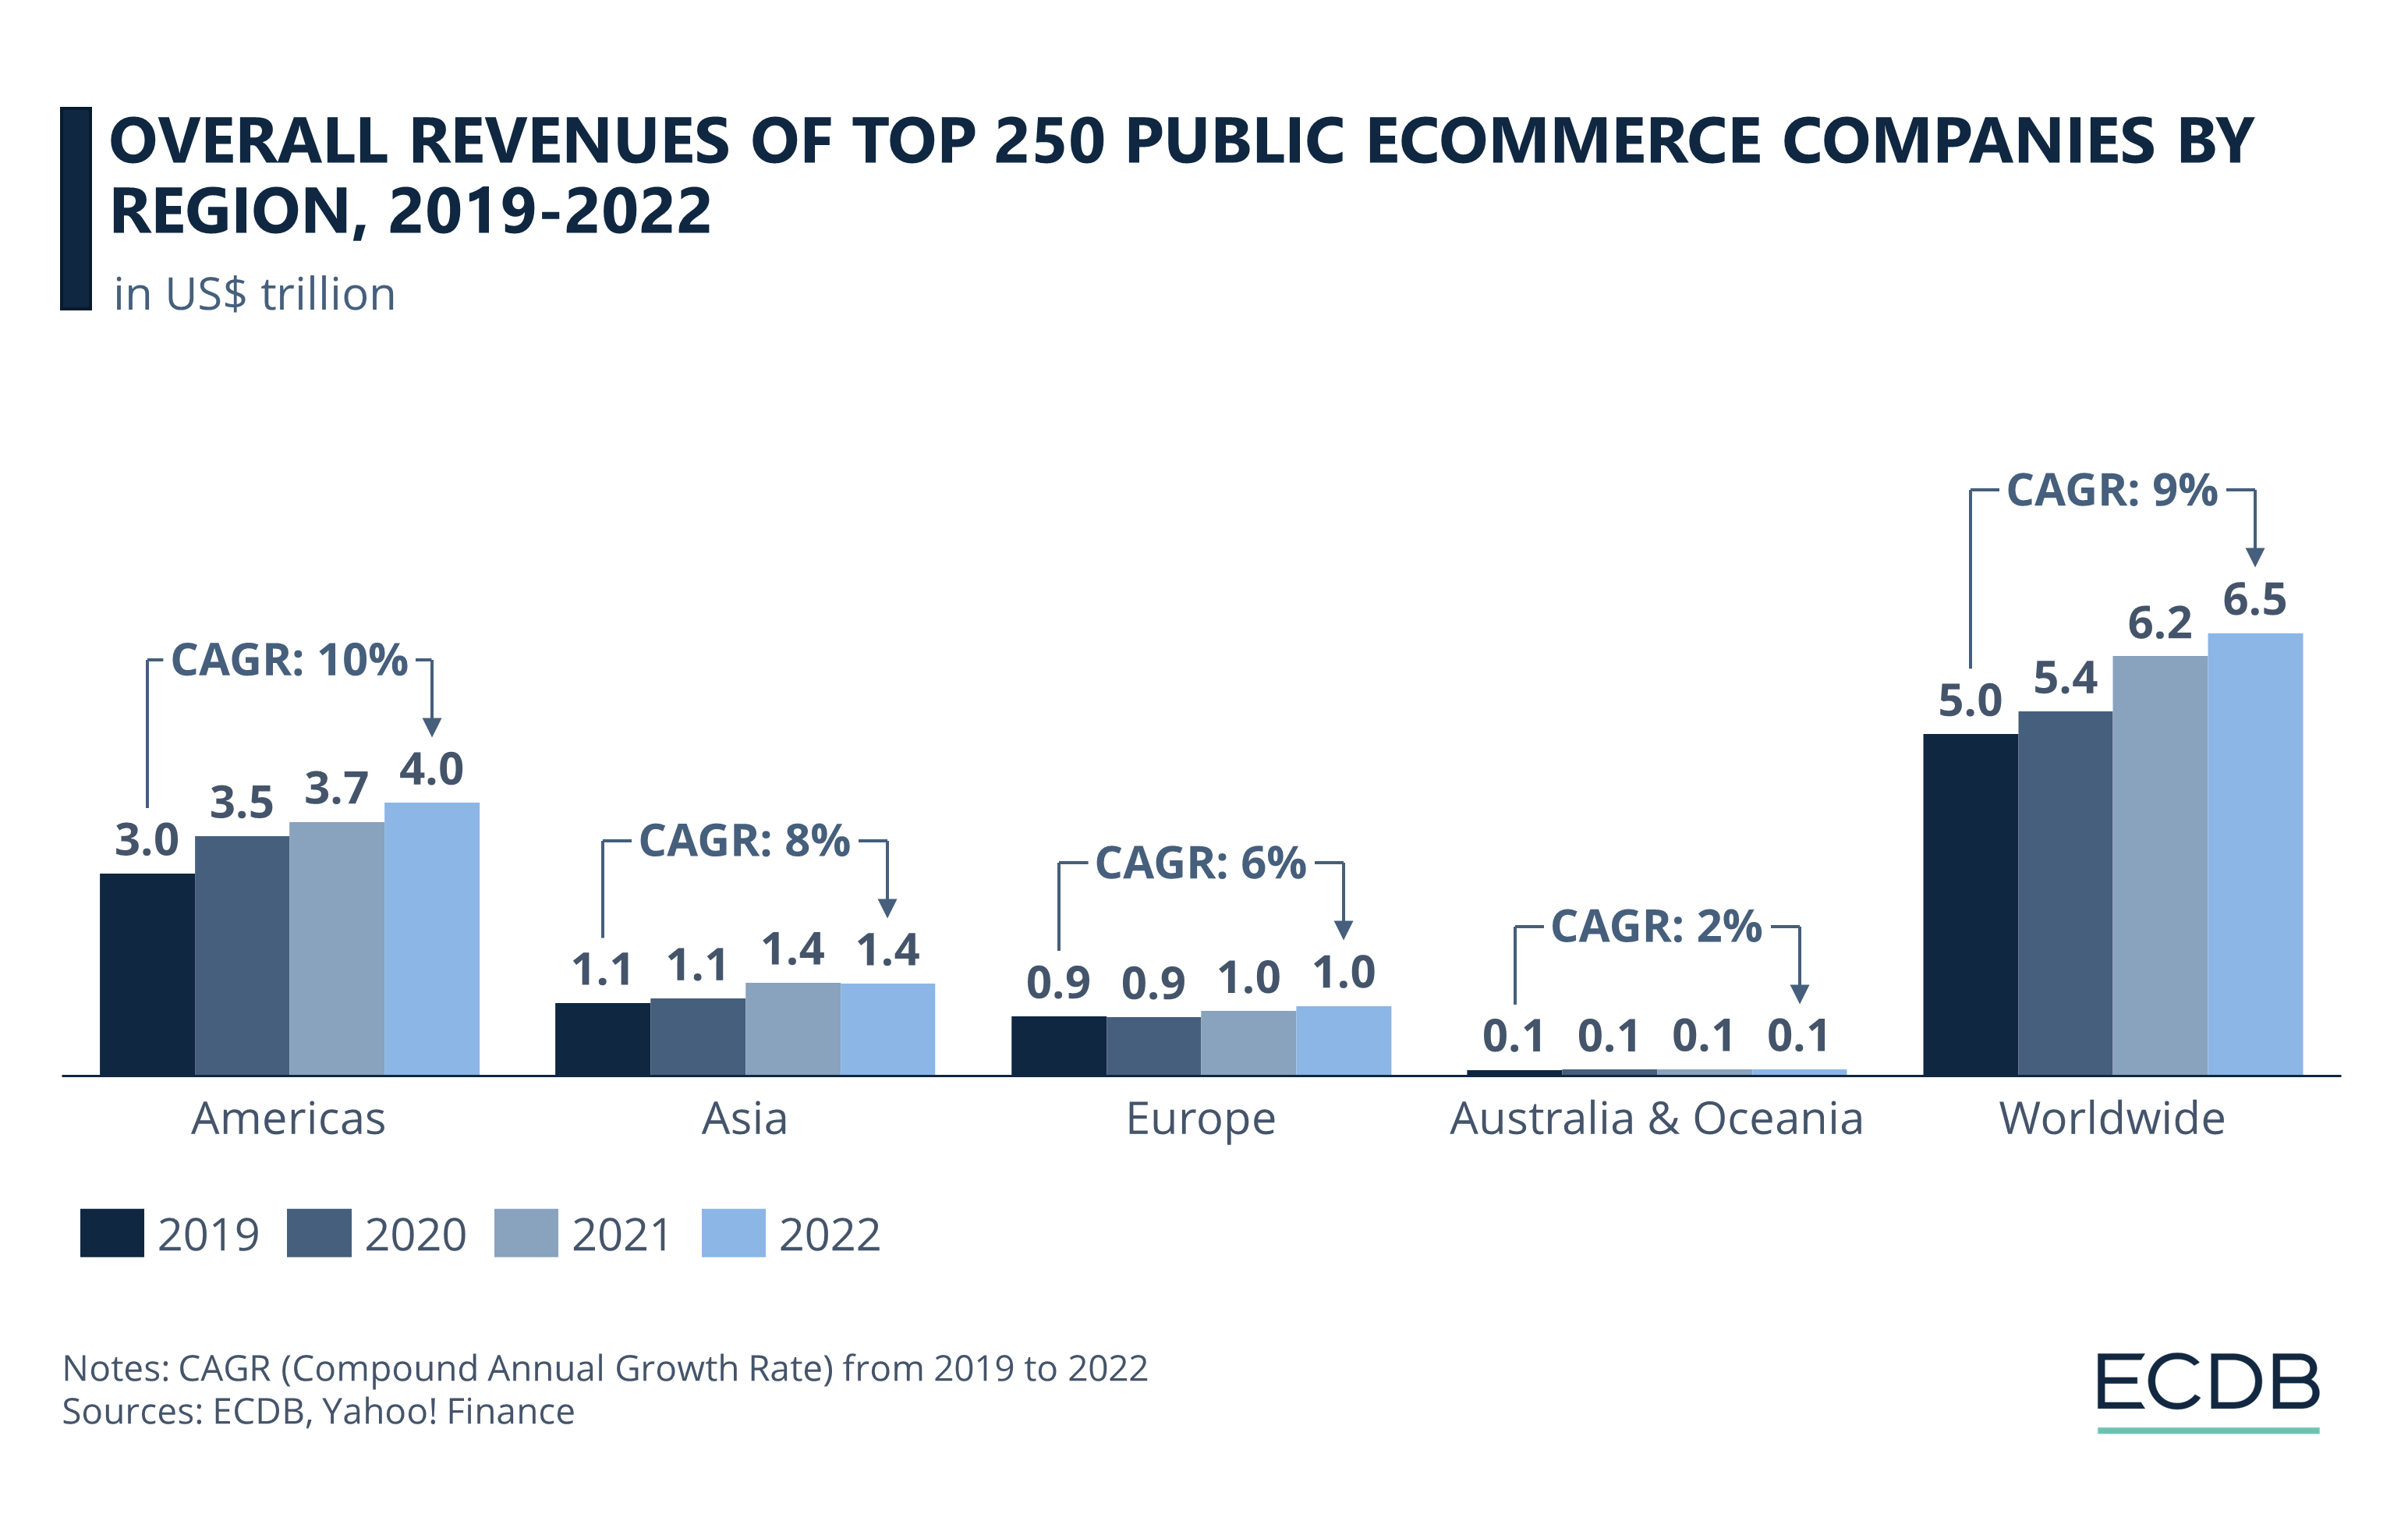 Overall Revenues of Top 250 eCommerce Companies by Region, 2019-2022